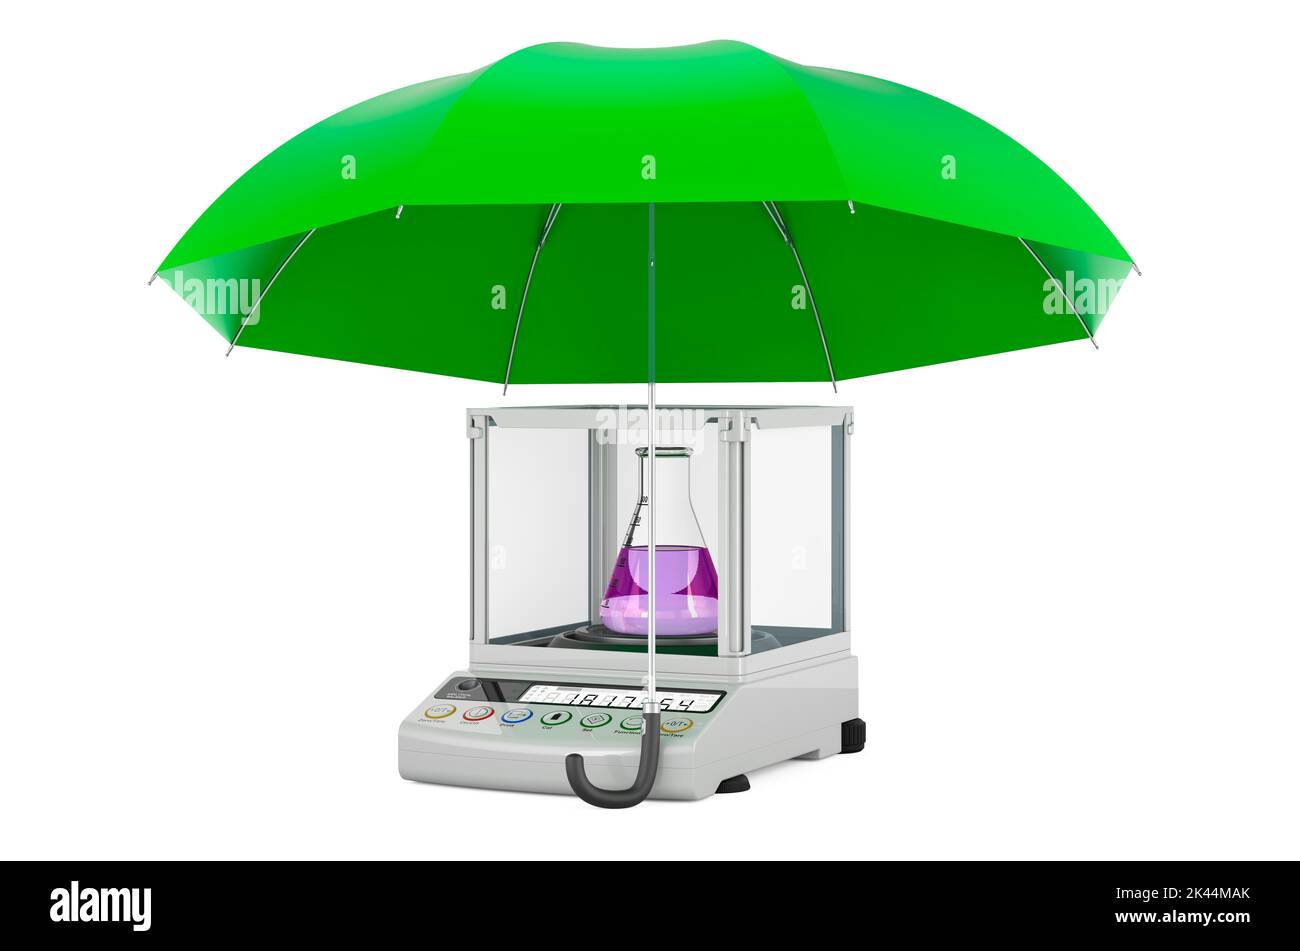 Digital Lab Scale under umbrella, 3D rendering isolated on white background Stock Photo